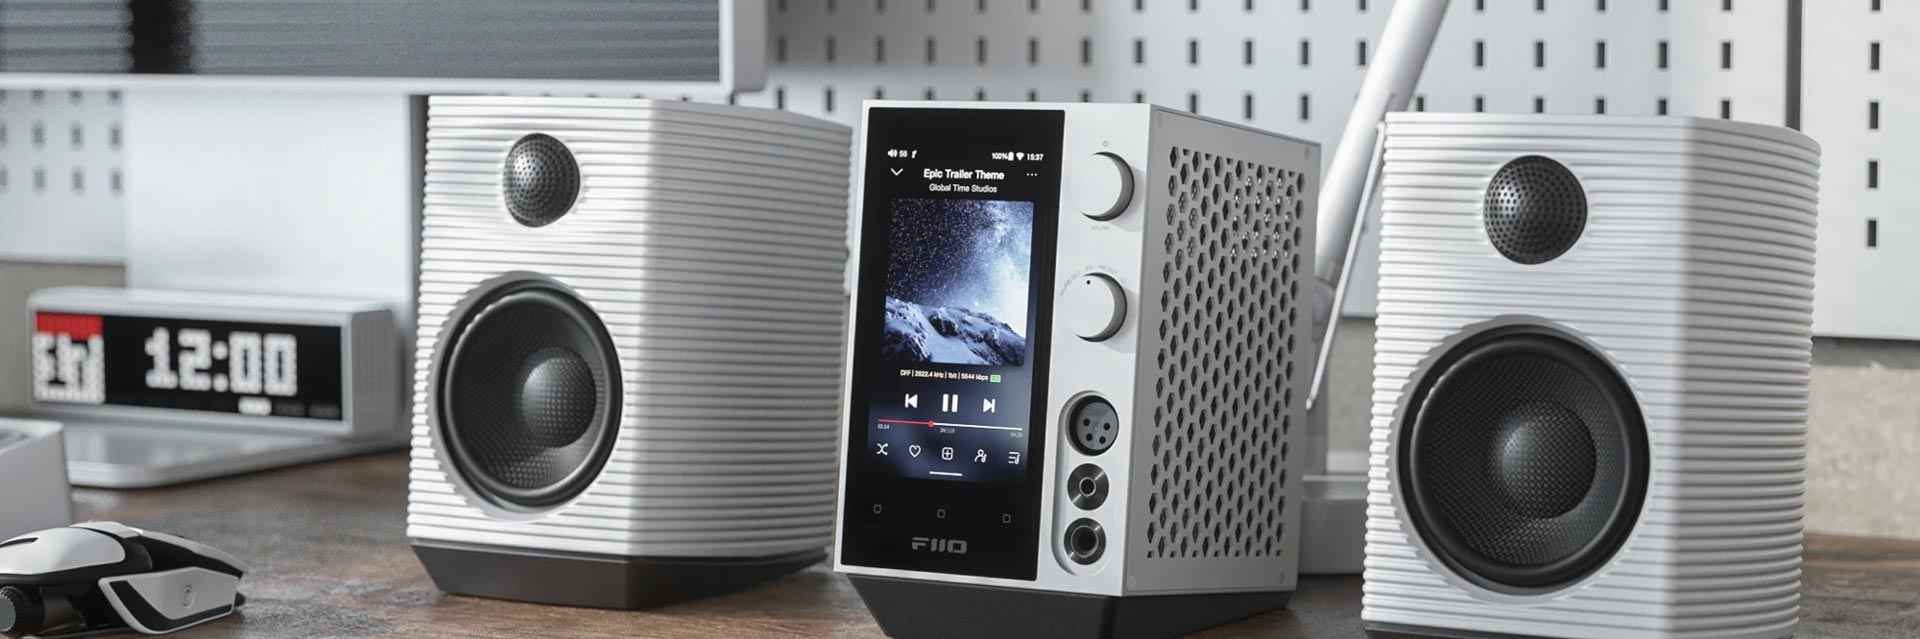 Black and White Versions, FiiO Desktop HiFi Center,  Transmitter/Decoder/Amp/Preamp All-in-One Unit FiiO R7 Is Officially  Released!-FIIO---BORN FOR MUSIC